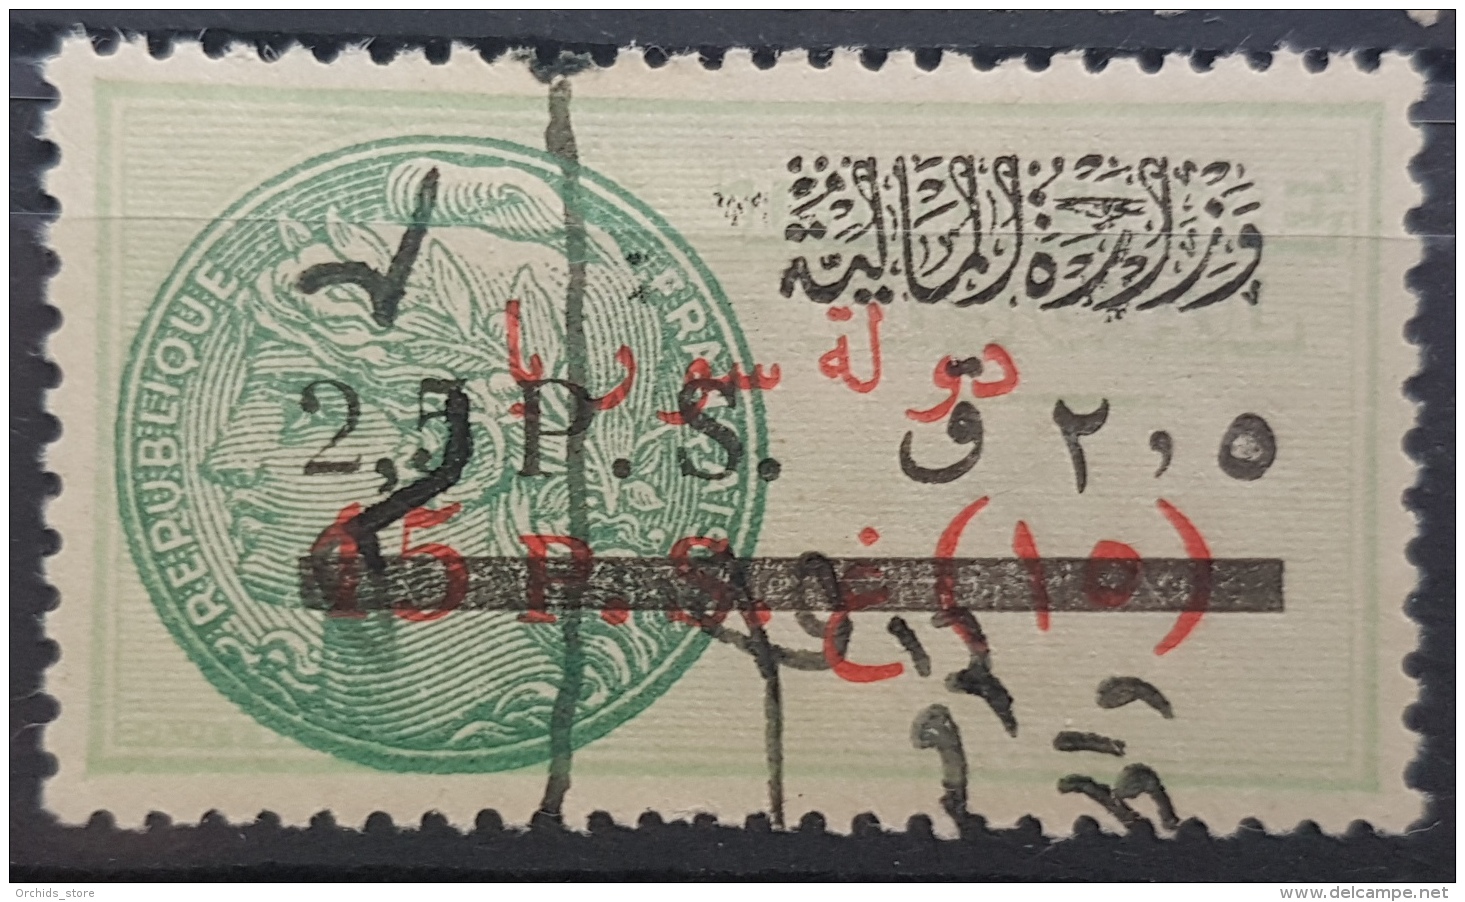 BB2 #151 - Syria 1936 Fiscal Revenue Stamp 2,50p Overprint On 15p Without French Value - Syria